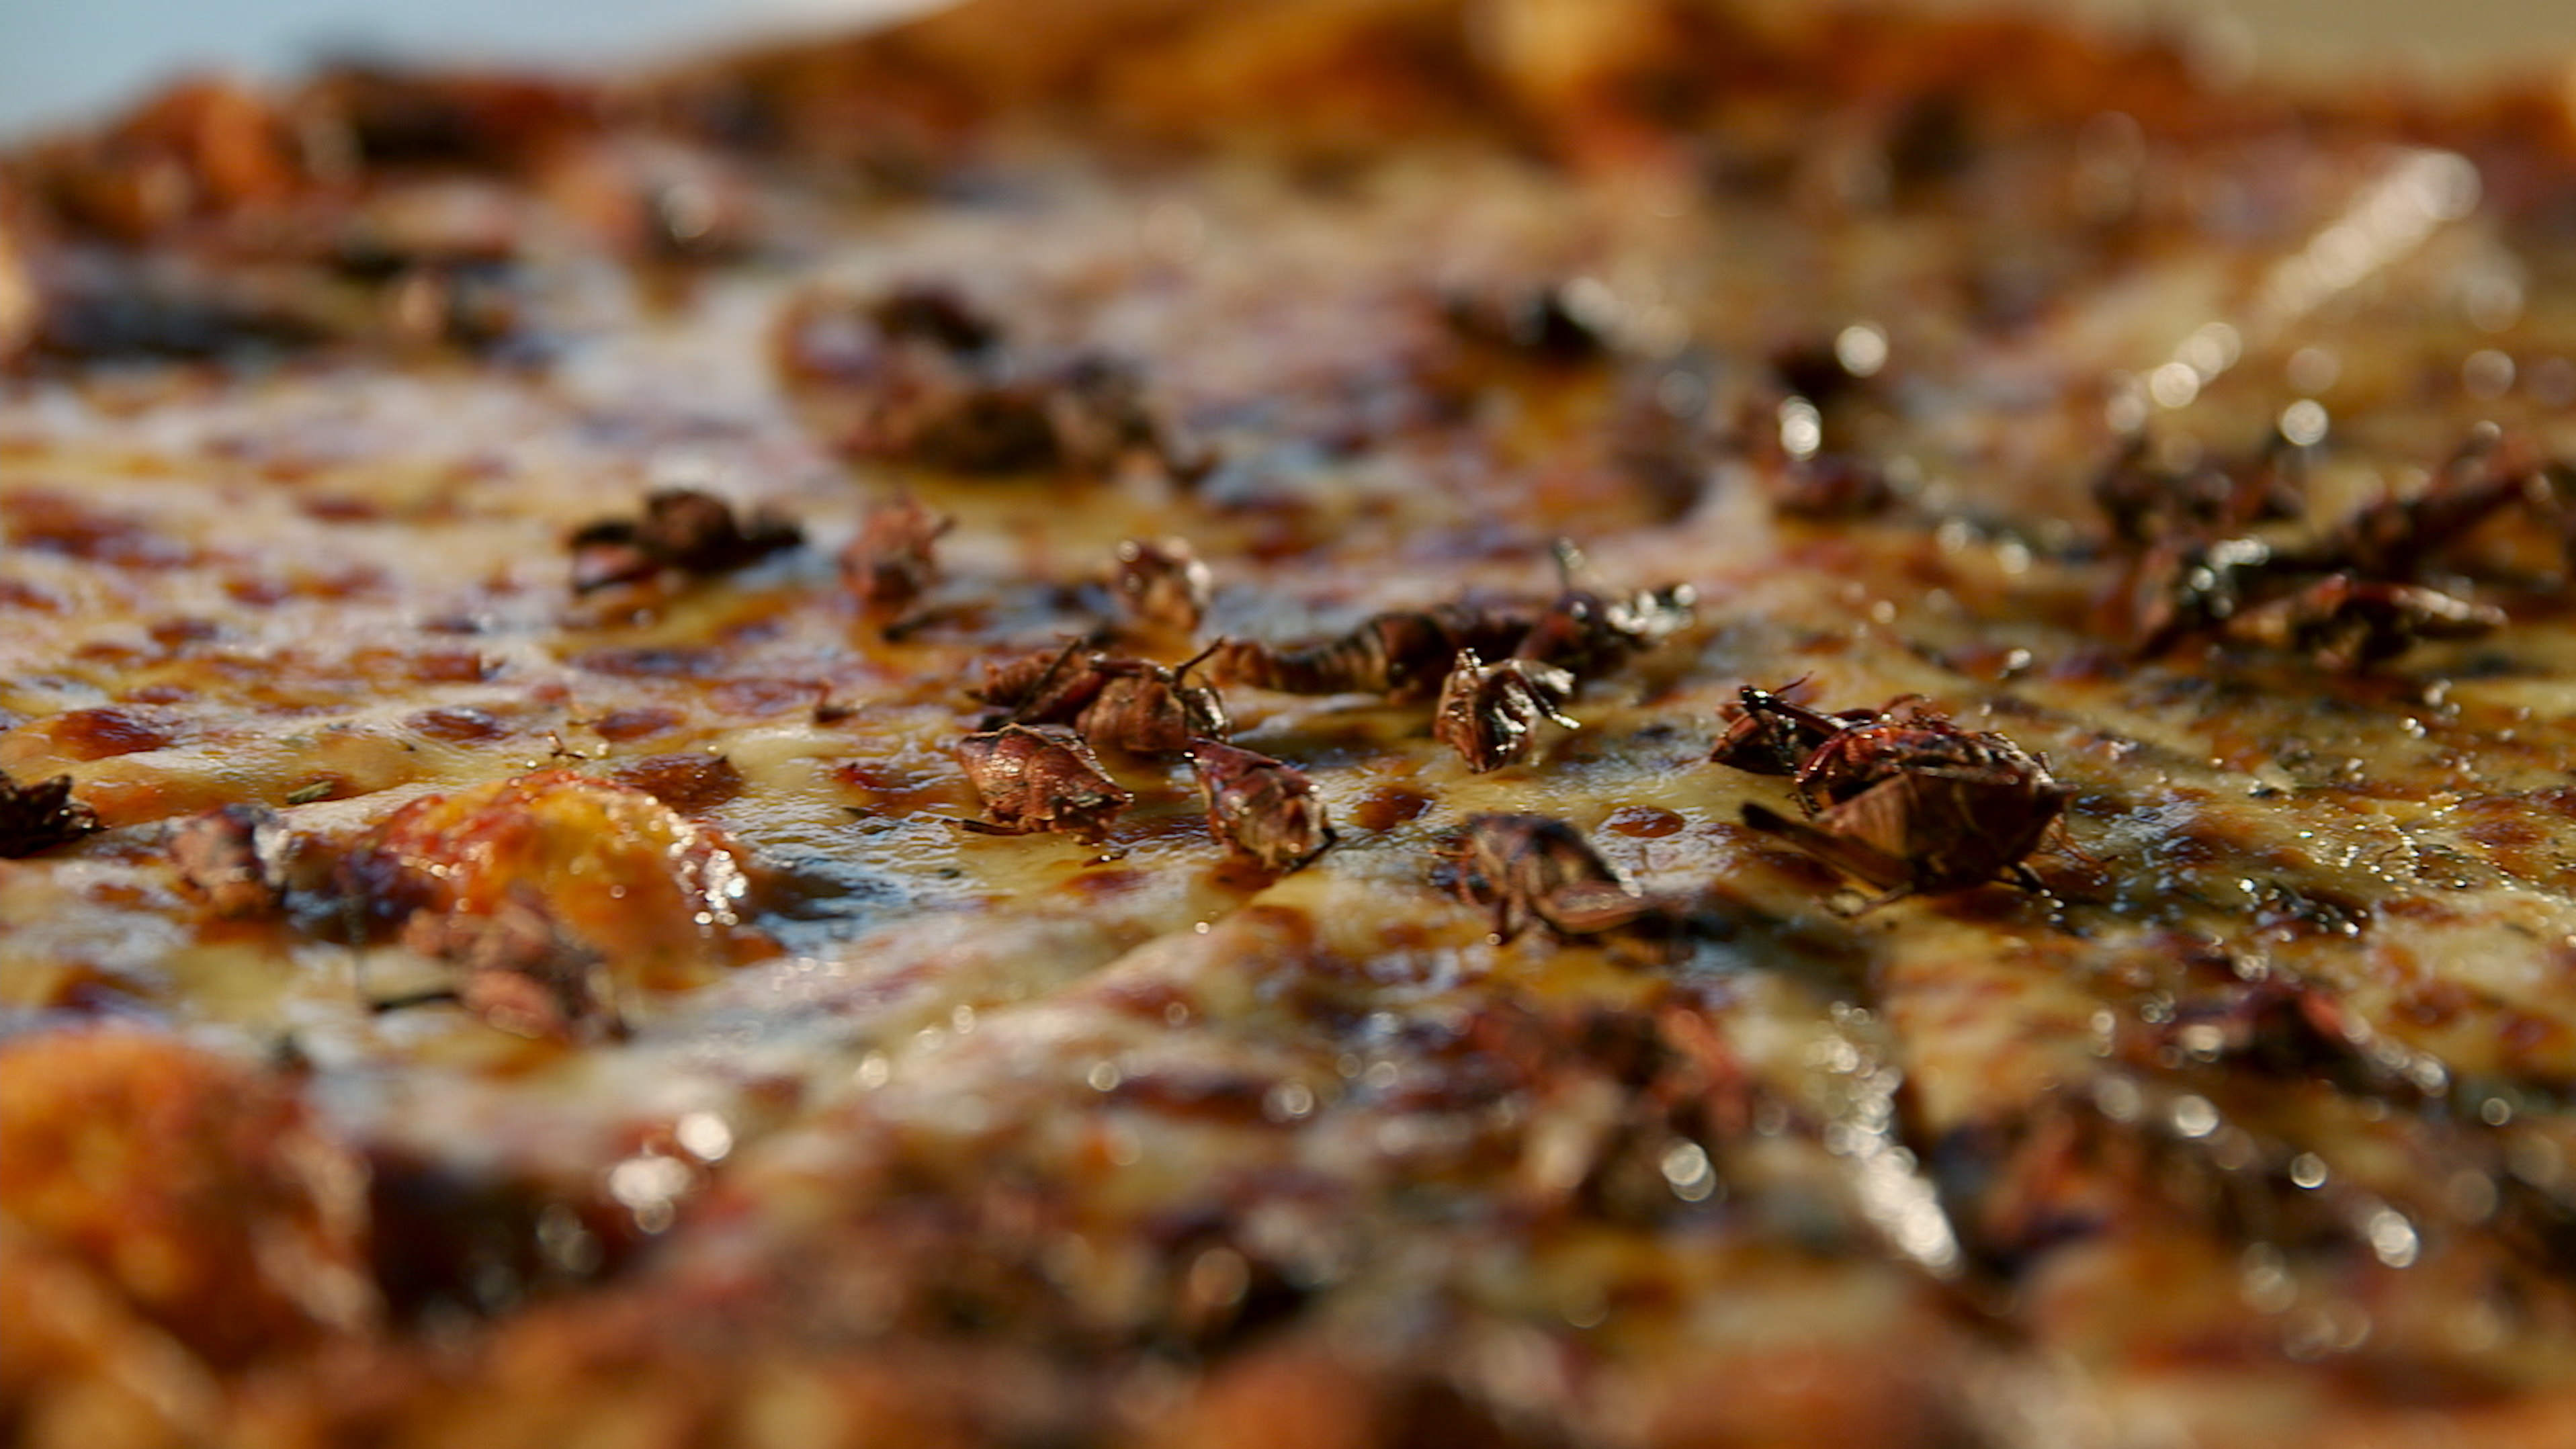 Crickets on a pizza? Chef David George Gordon likens the insects to crawfish. Chef Joseph Yoon agrees, calling them "gateway bugs."